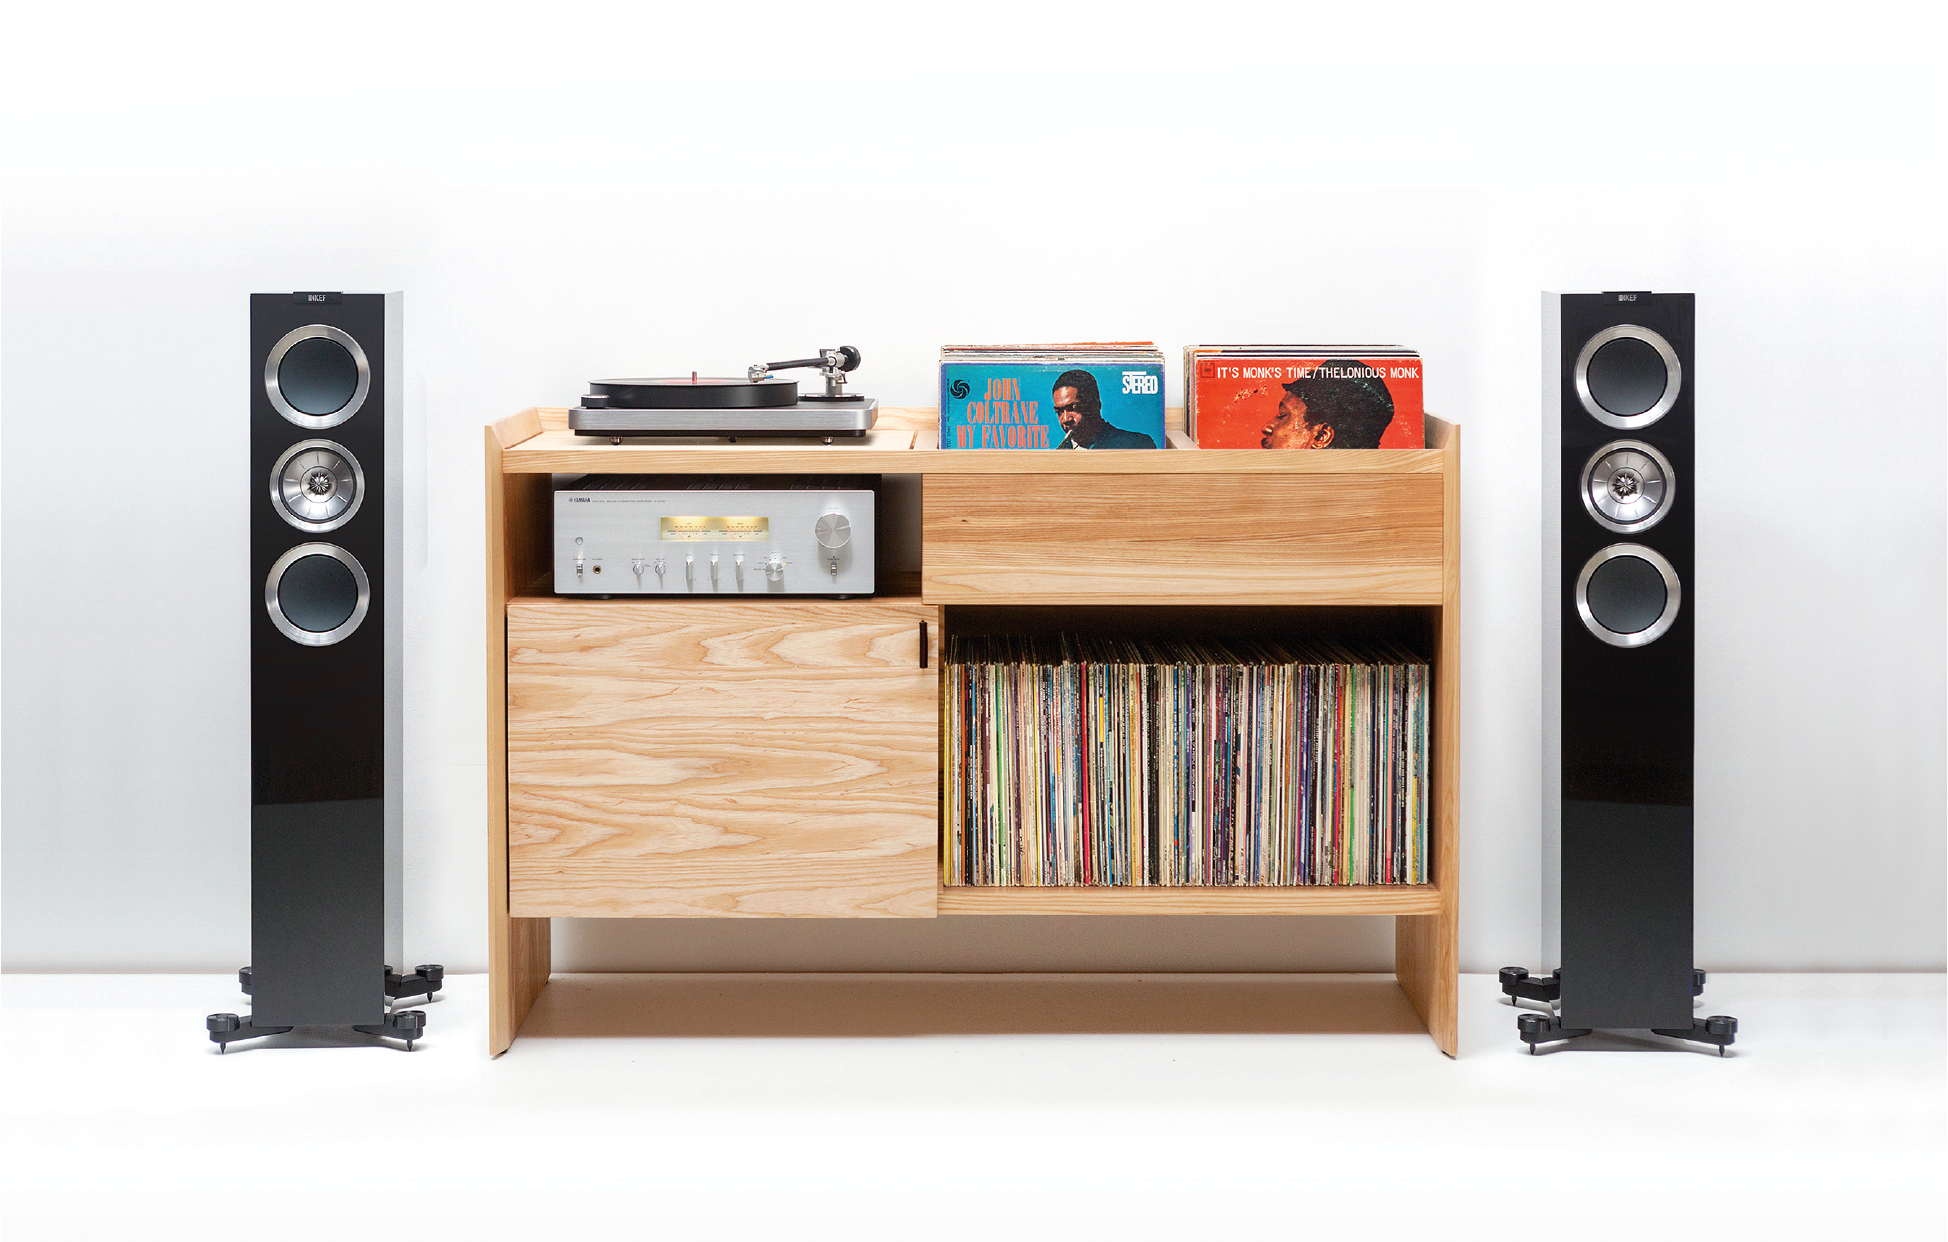 The 52-inch Unison model from Symbol Audio in natural ash, 34 x 52 x 18 in., holds stereo equipment behind a swinging door and up to 420 LPs. It features a vibration-isolated turntable platform and flip bin–style record storage.